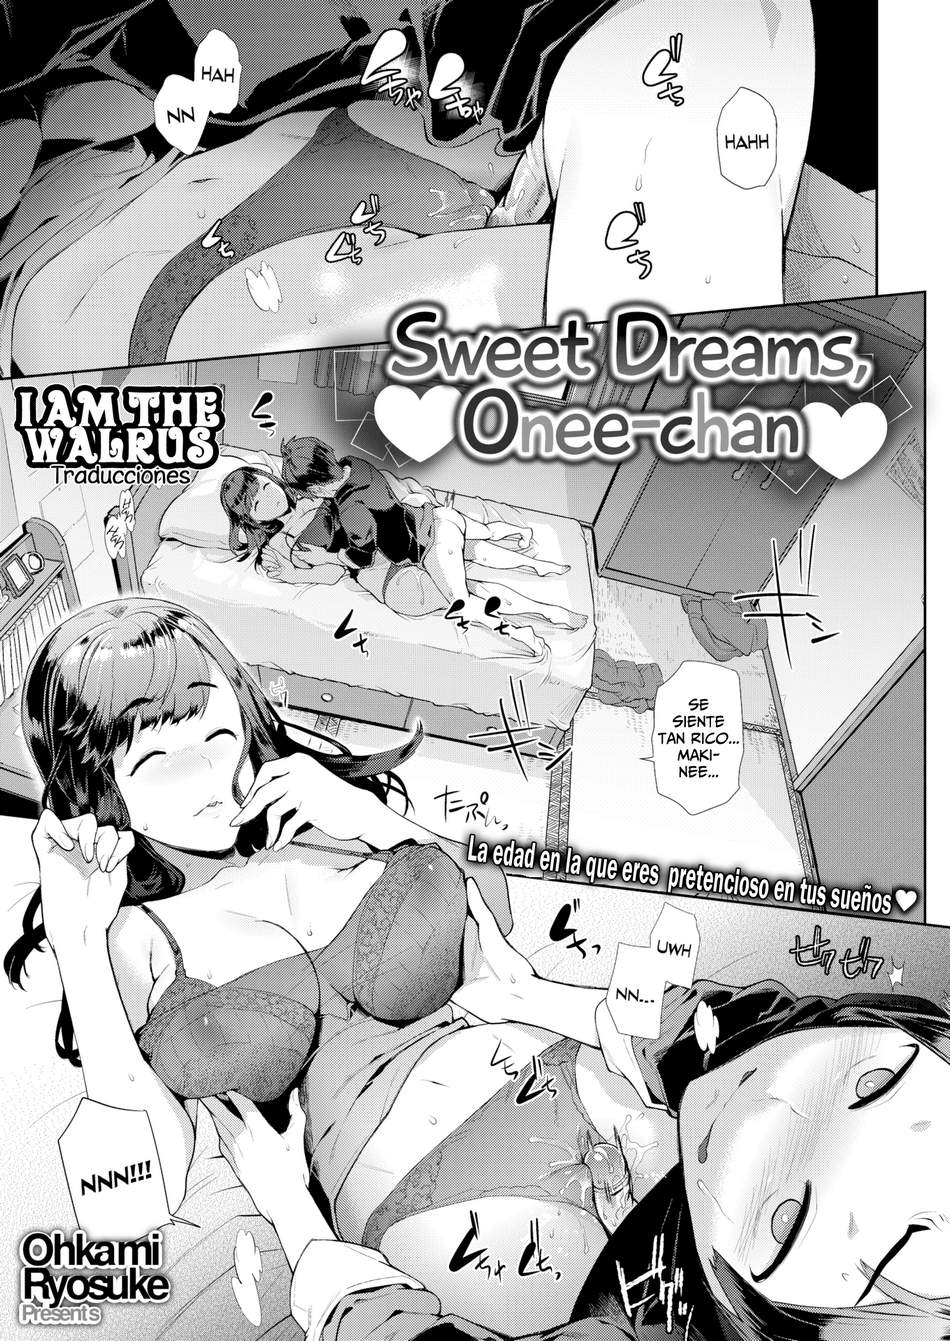 Dulces sueños onee-chan - Page #1